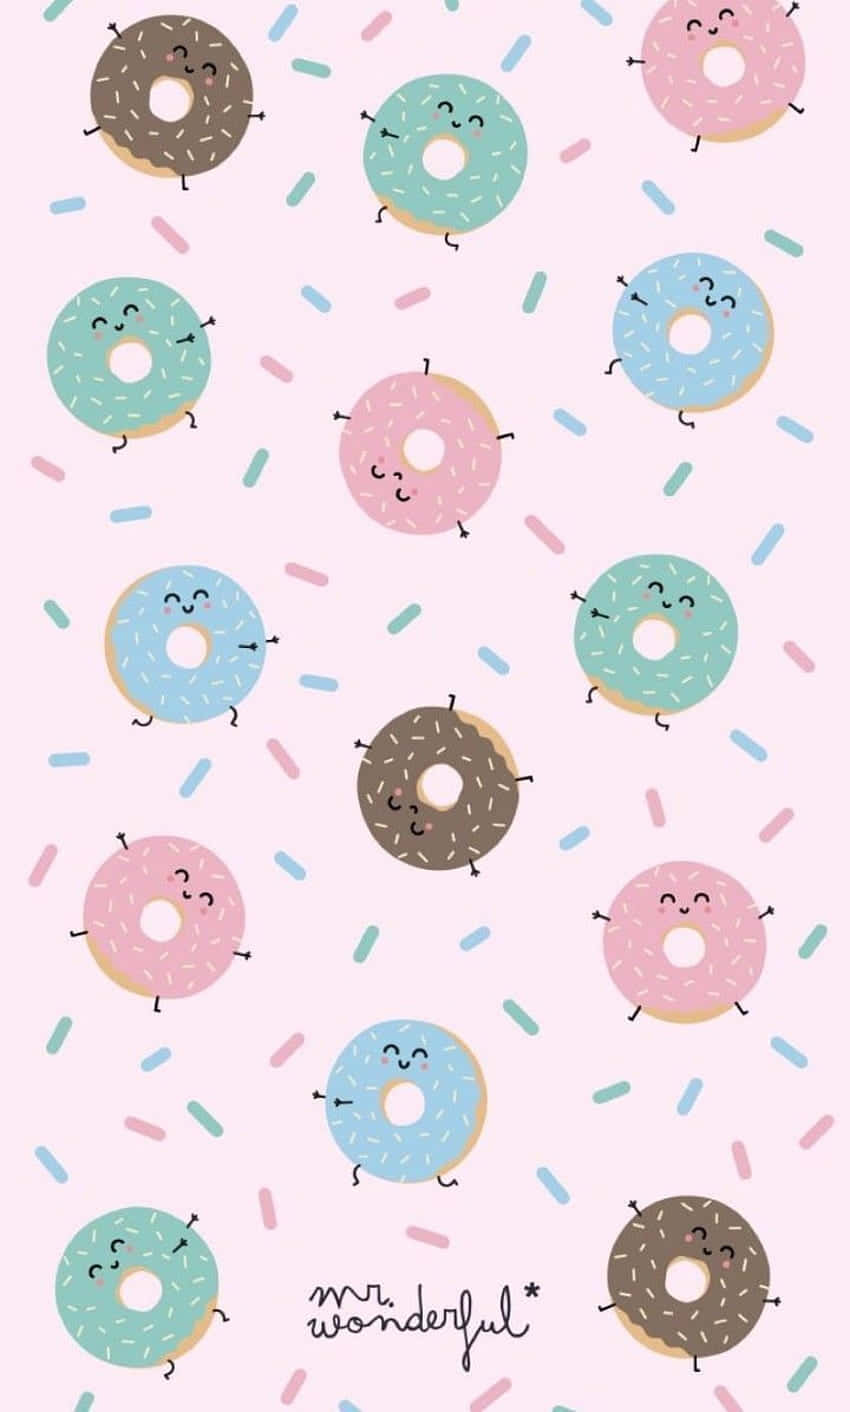 Delectable Cute Donut with Colorful Sprinkles Wallpaper